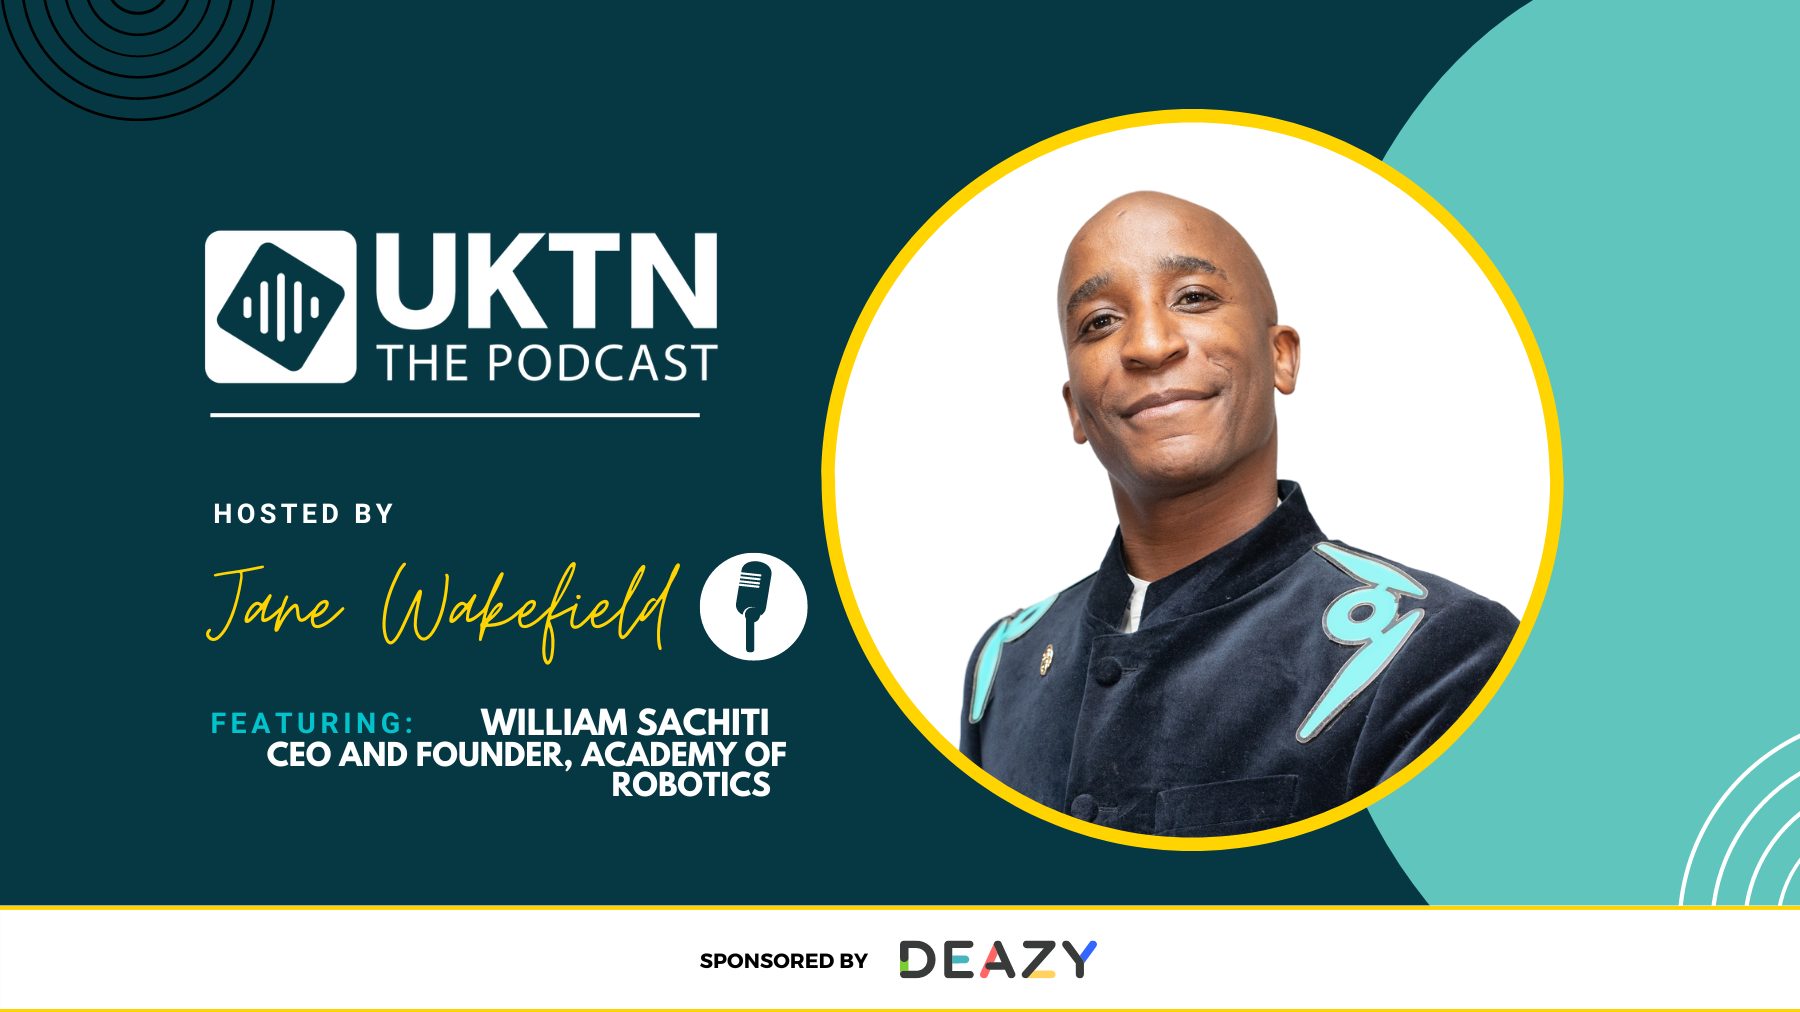 UKTN Podcast: Academy of Robotics CEO on ChatGPT in robots & disrupting autonomous delivery